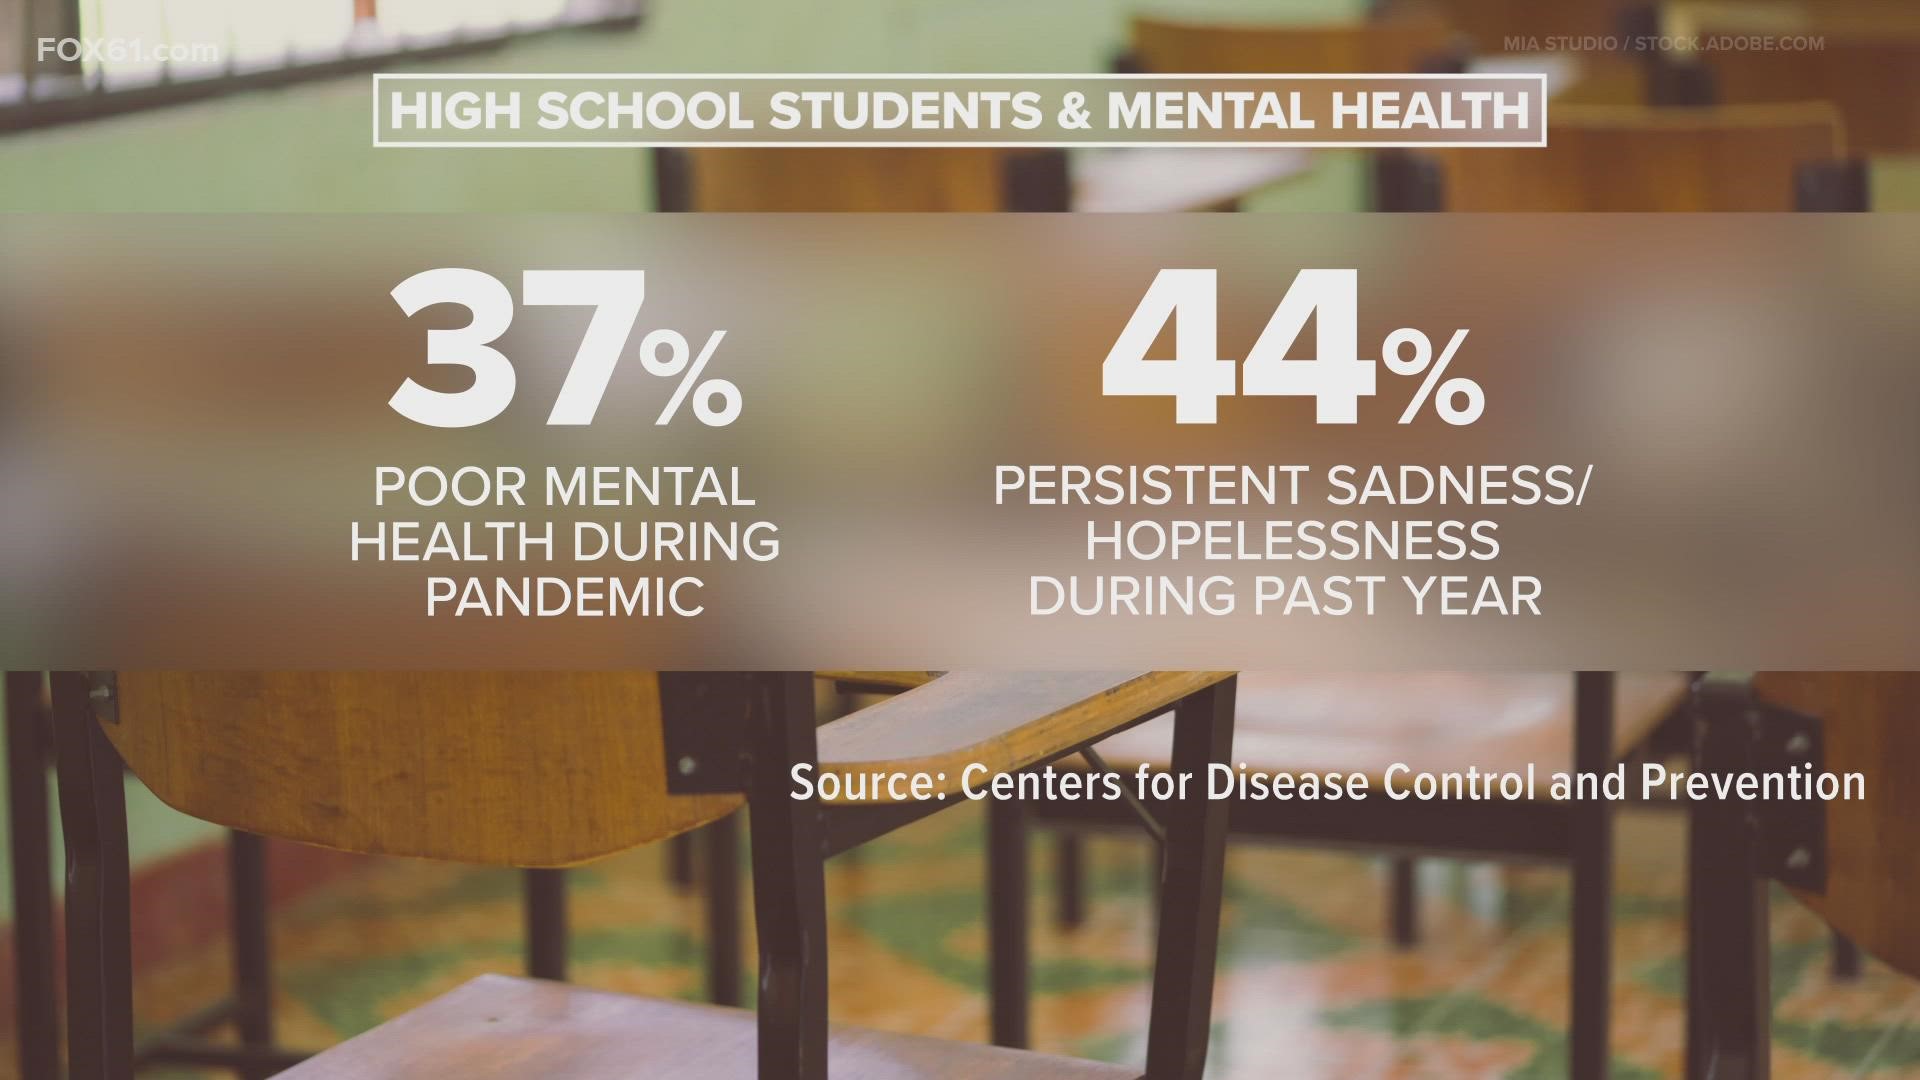 Schools are working to address the rising mental health challenges in students across the country.